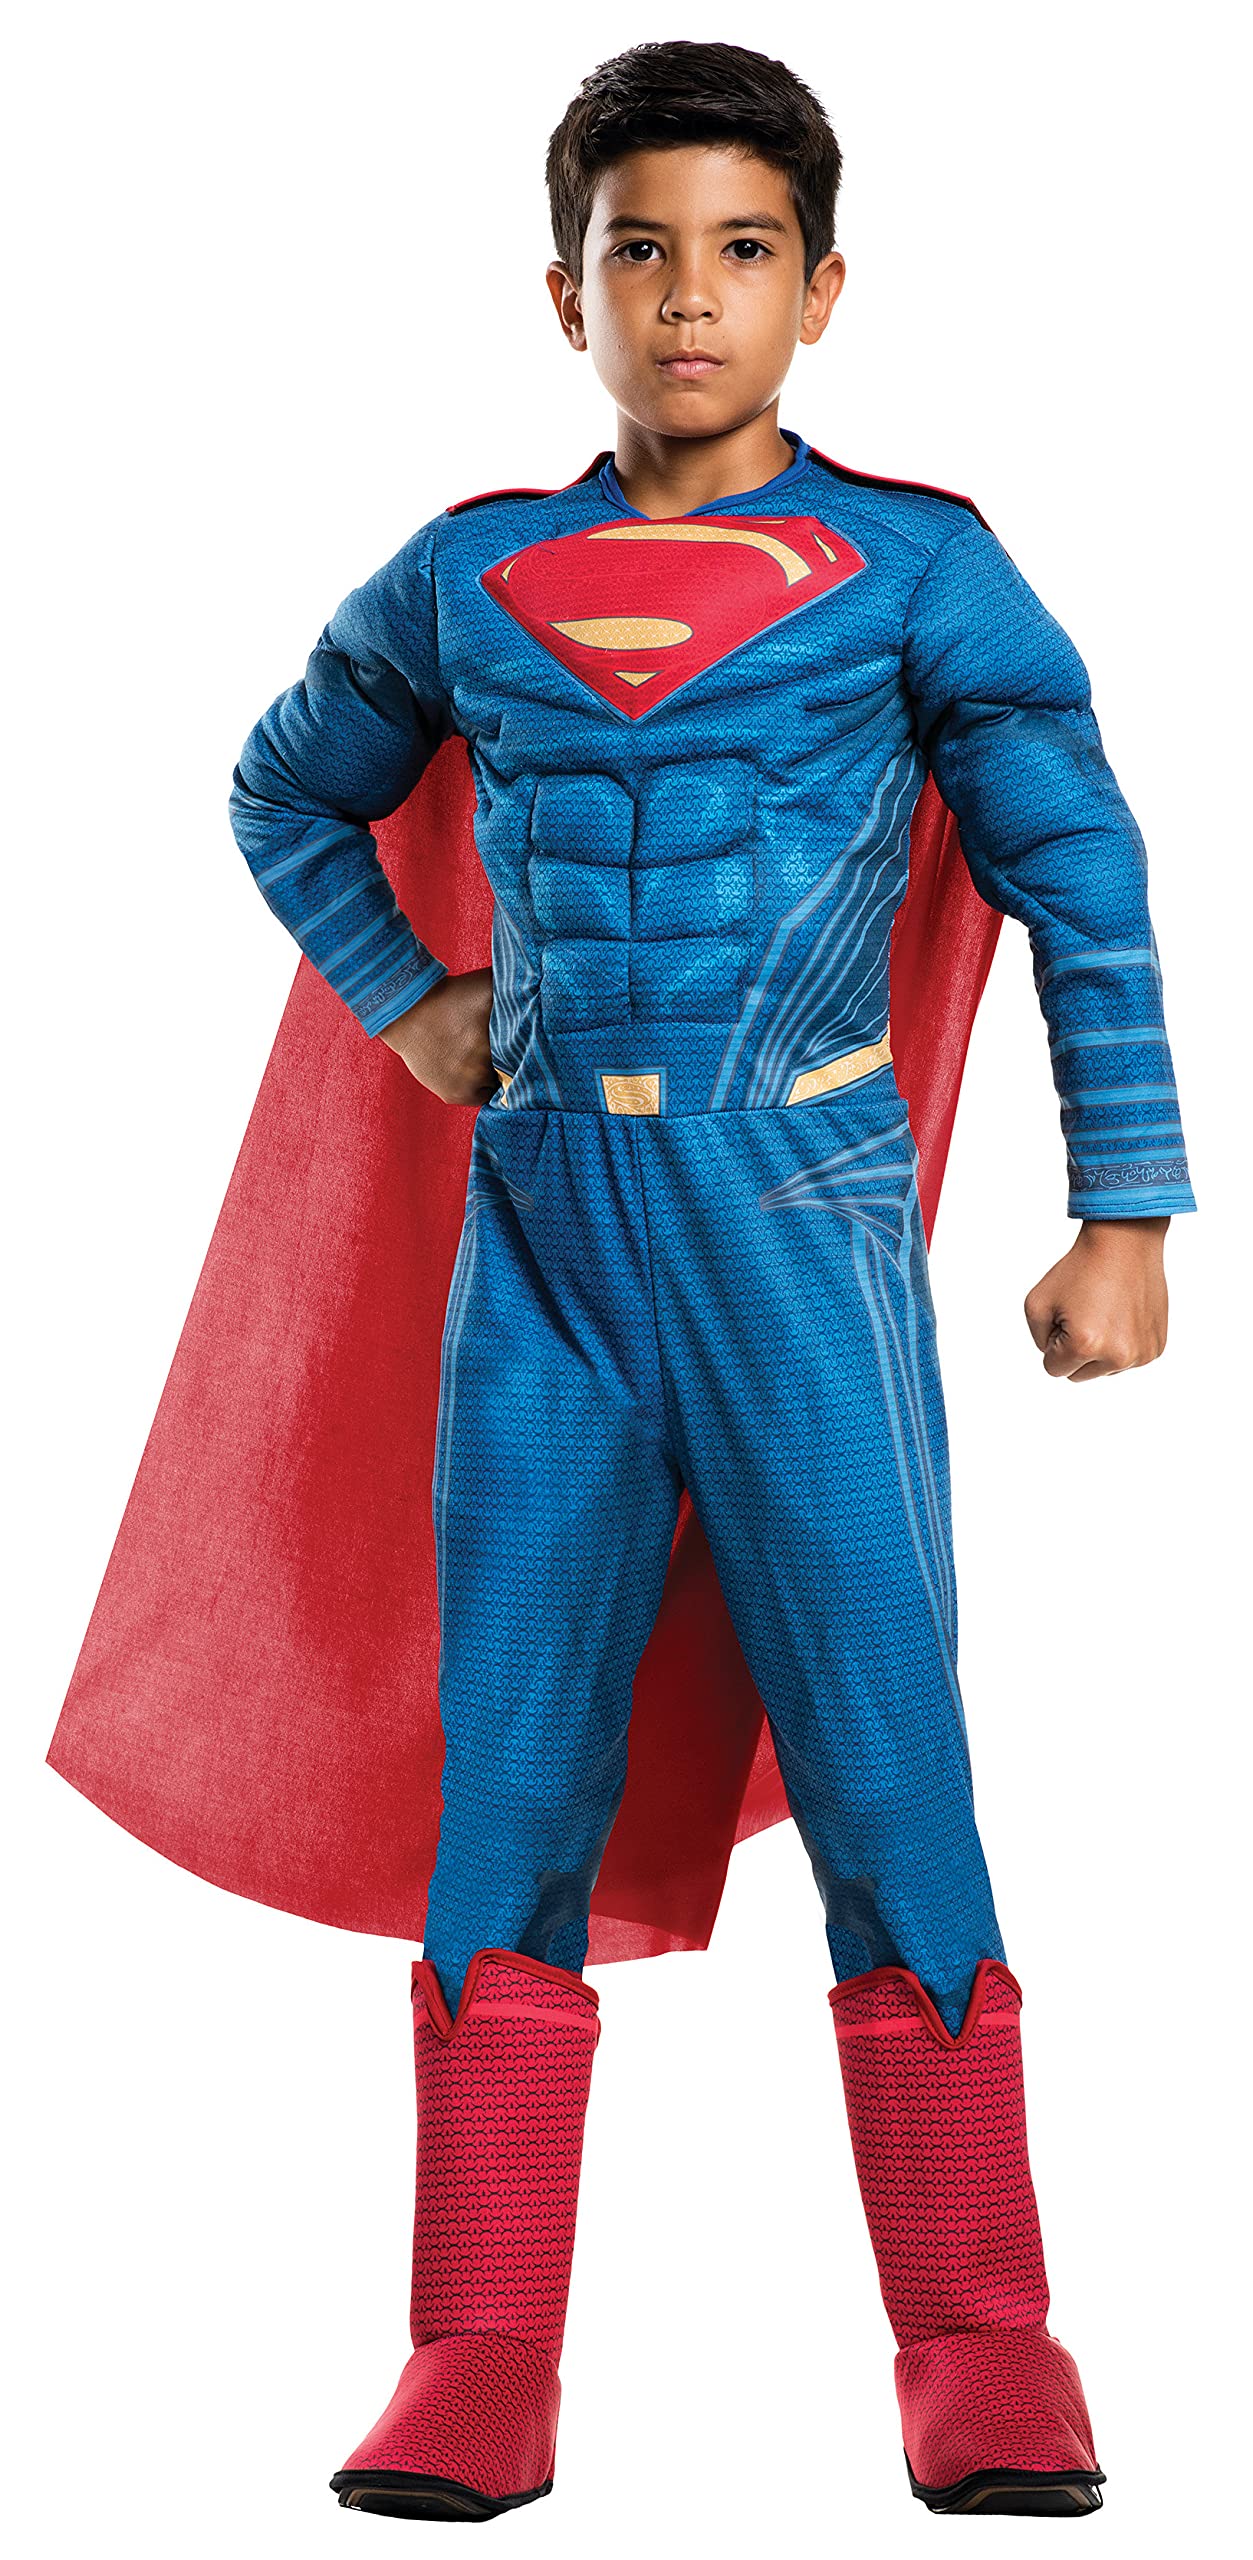 Rubie's Justice League Child's Deluxe Superman Costume, Small (640104_S)